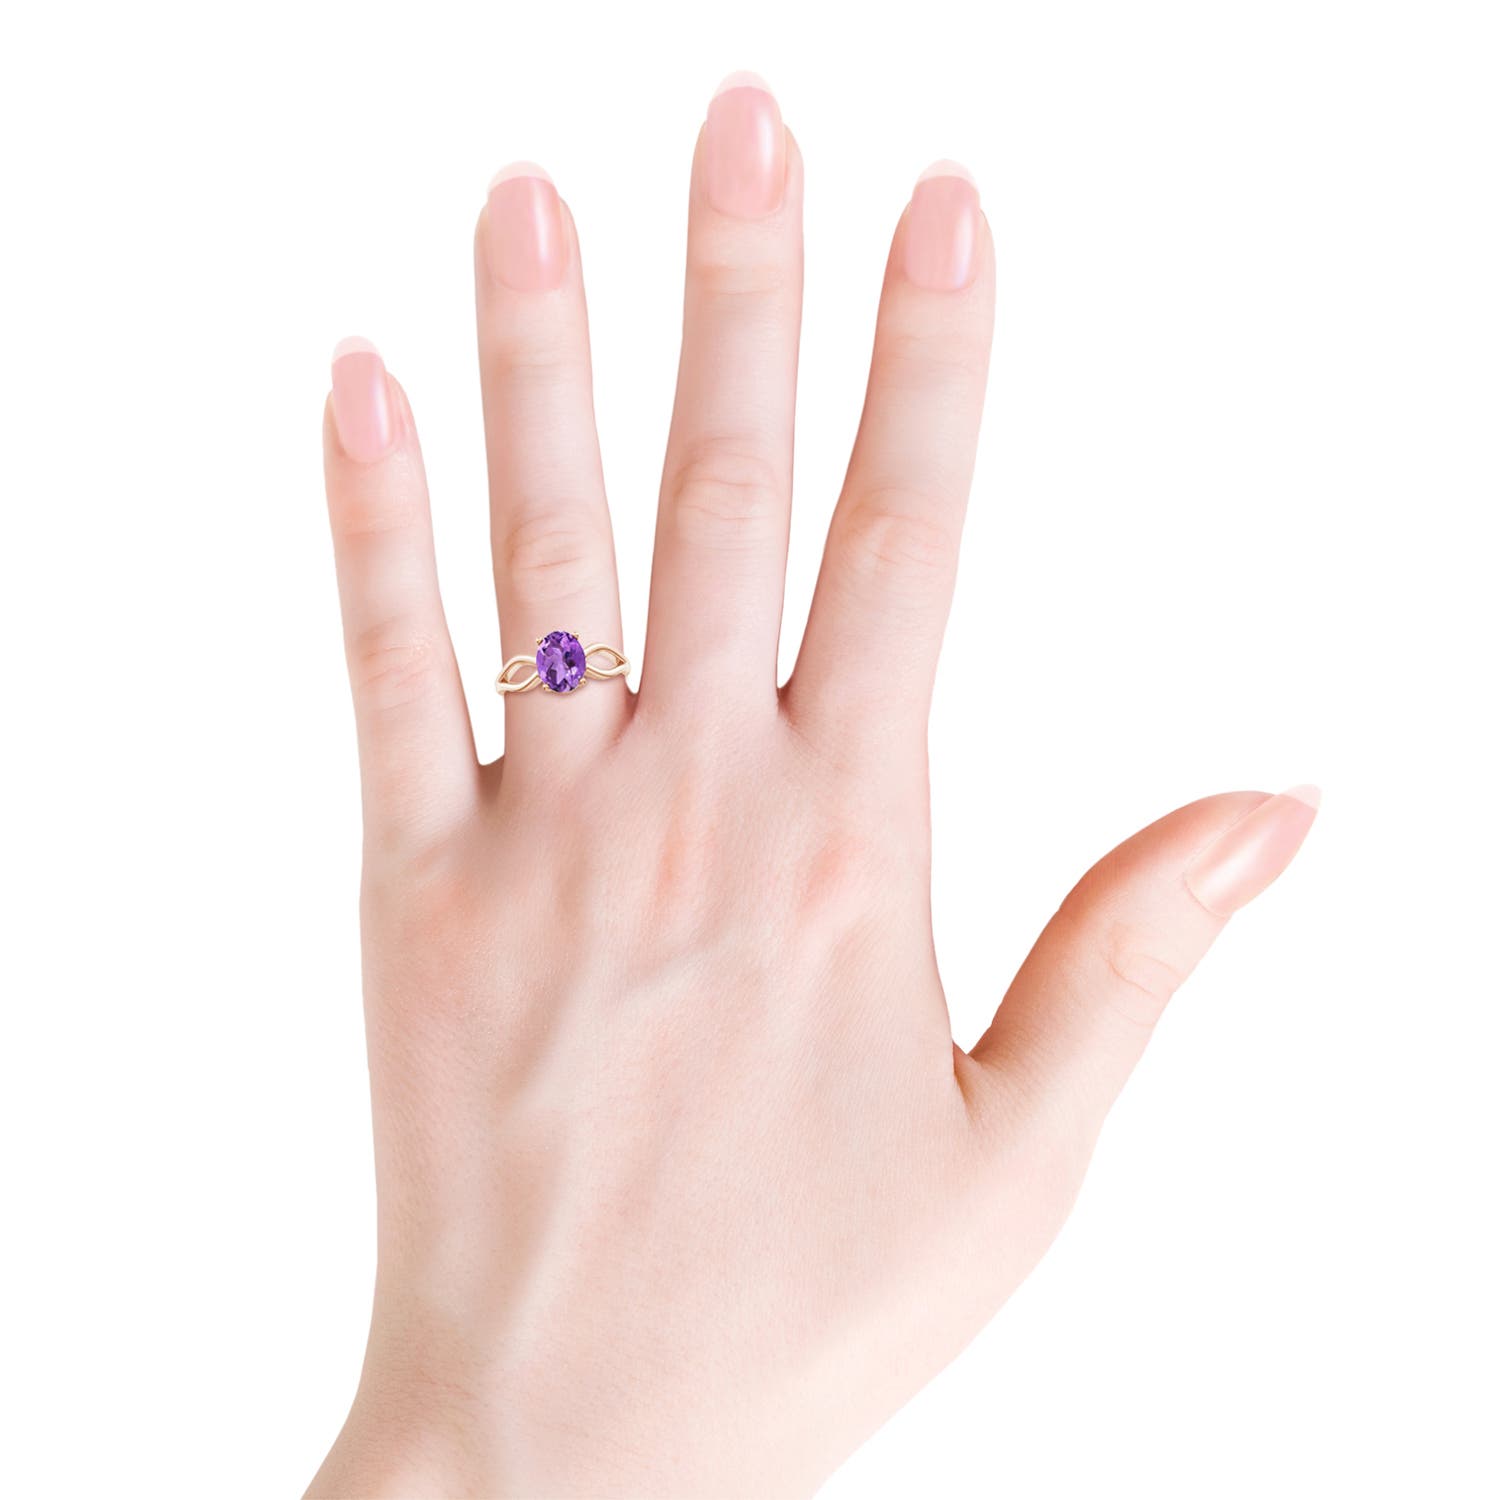 AA - Amethyst / 1.6 CT / 14 KT Rose Gold